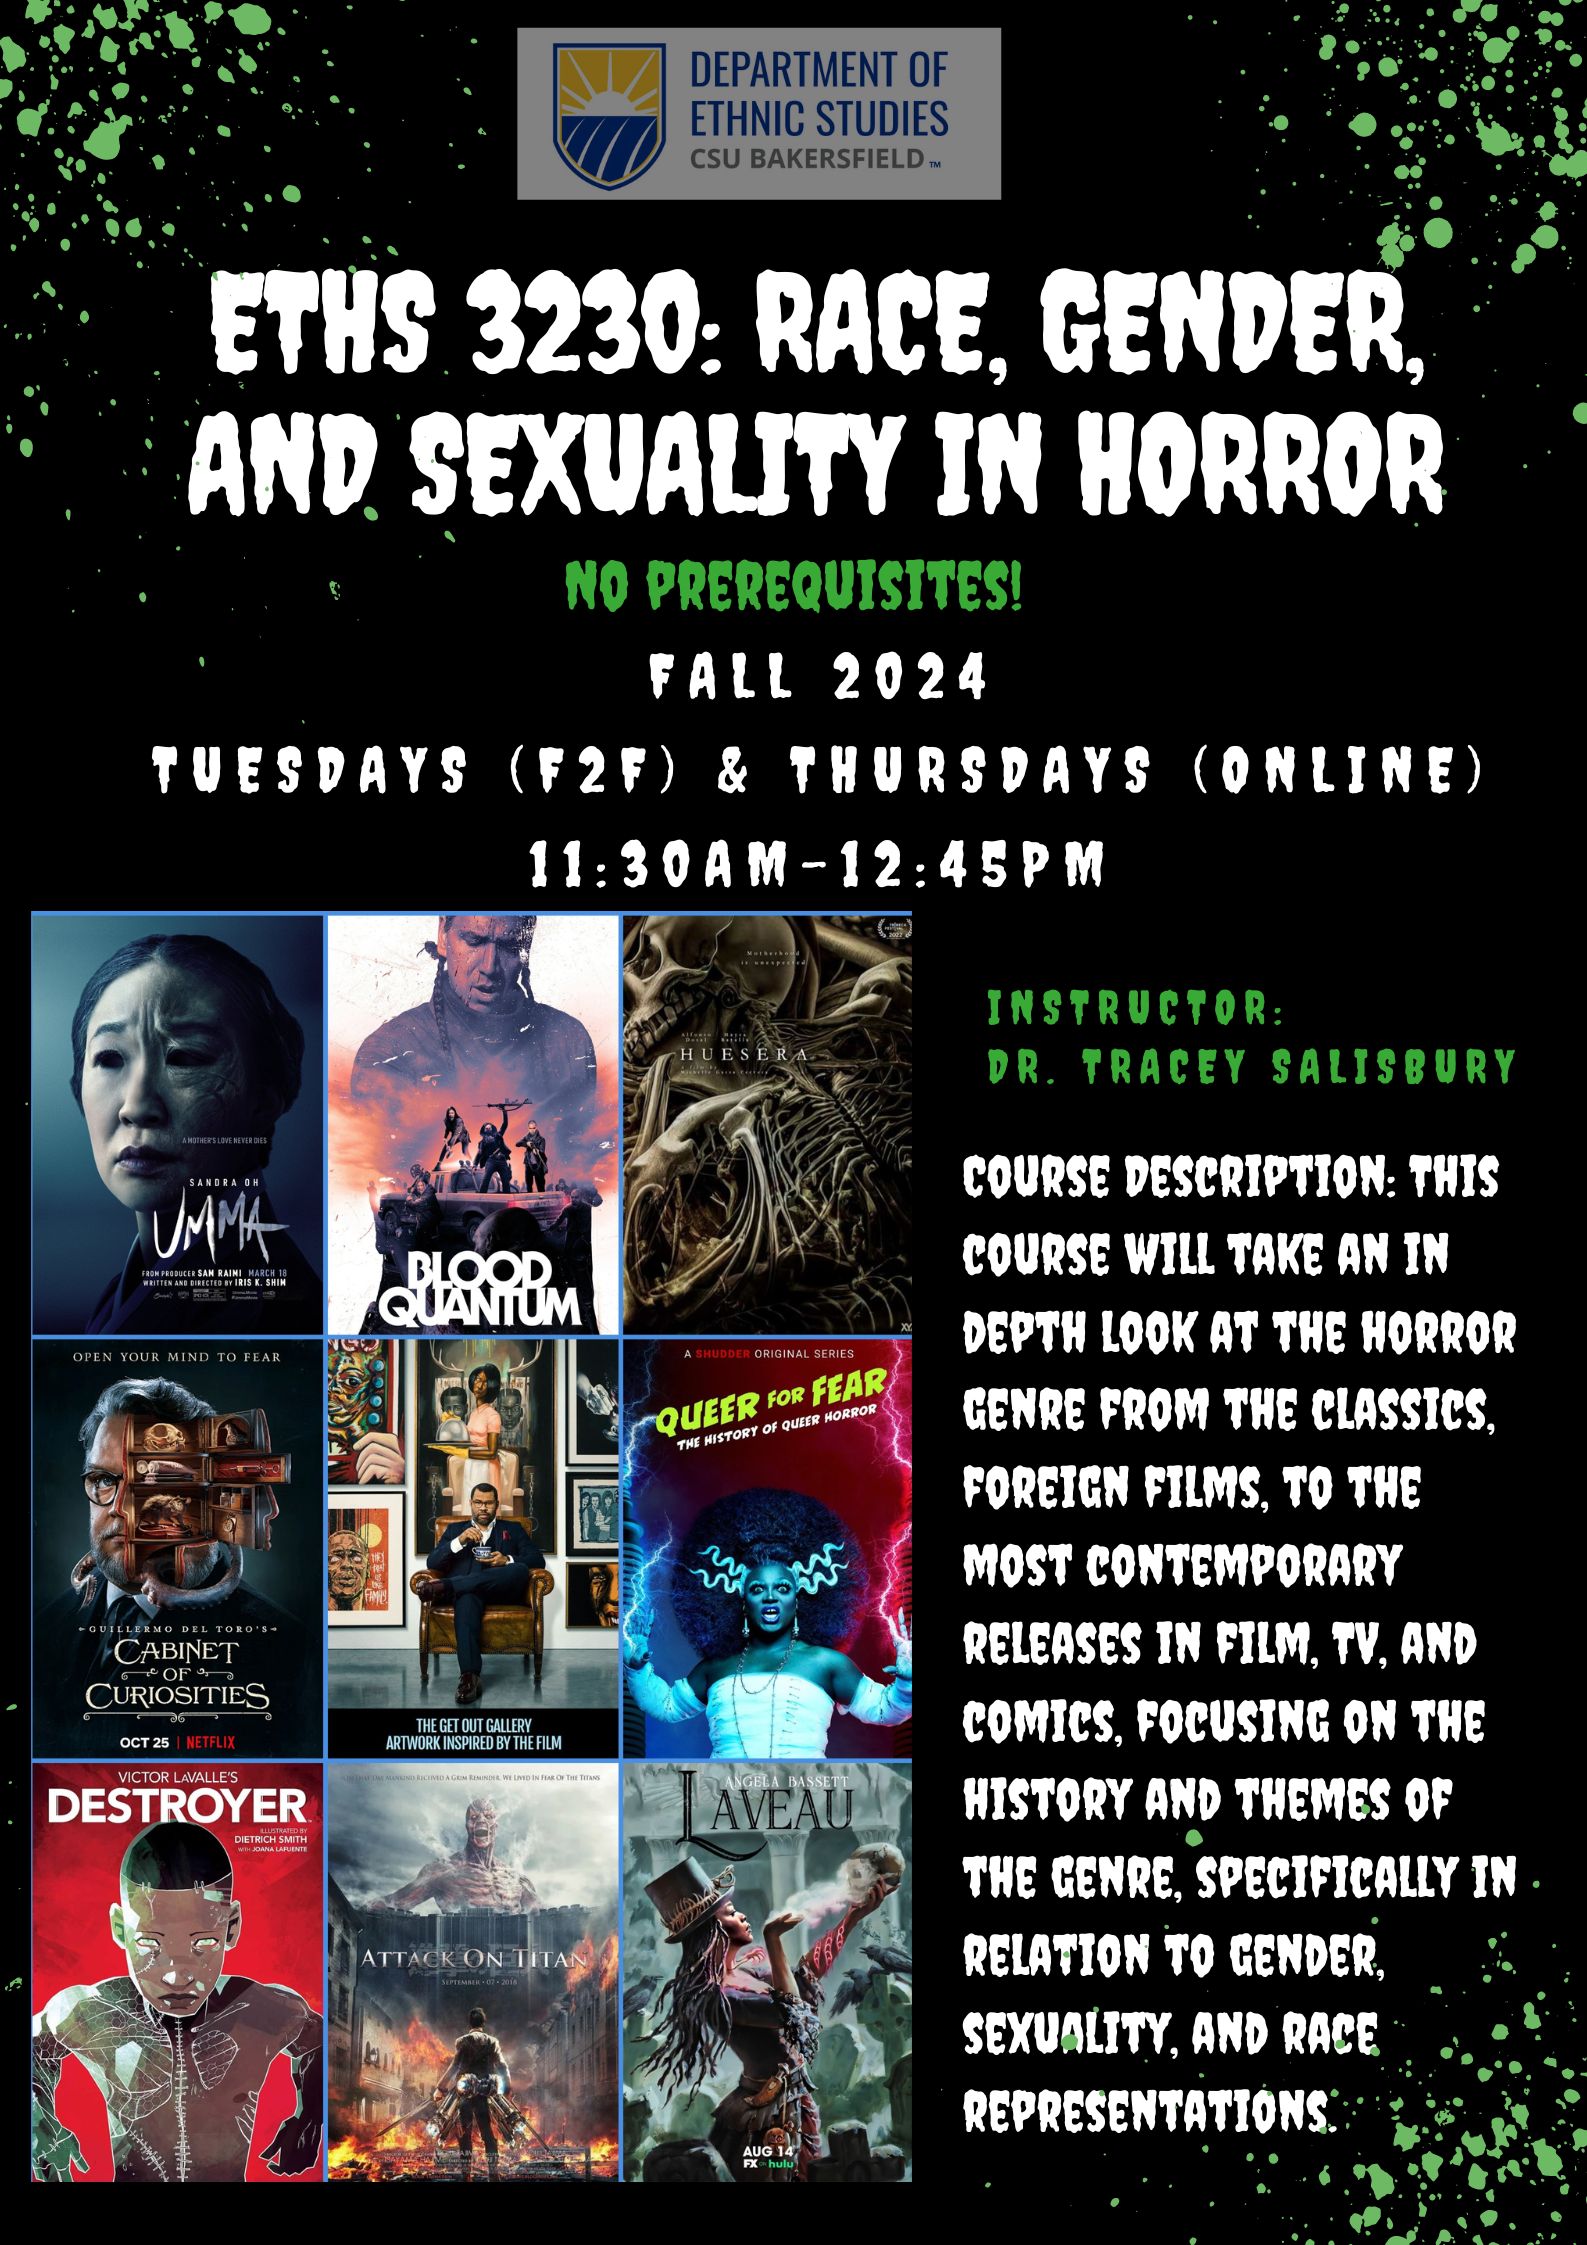 ETHS 3230 - Race, Gender, and Sexuality in Horror